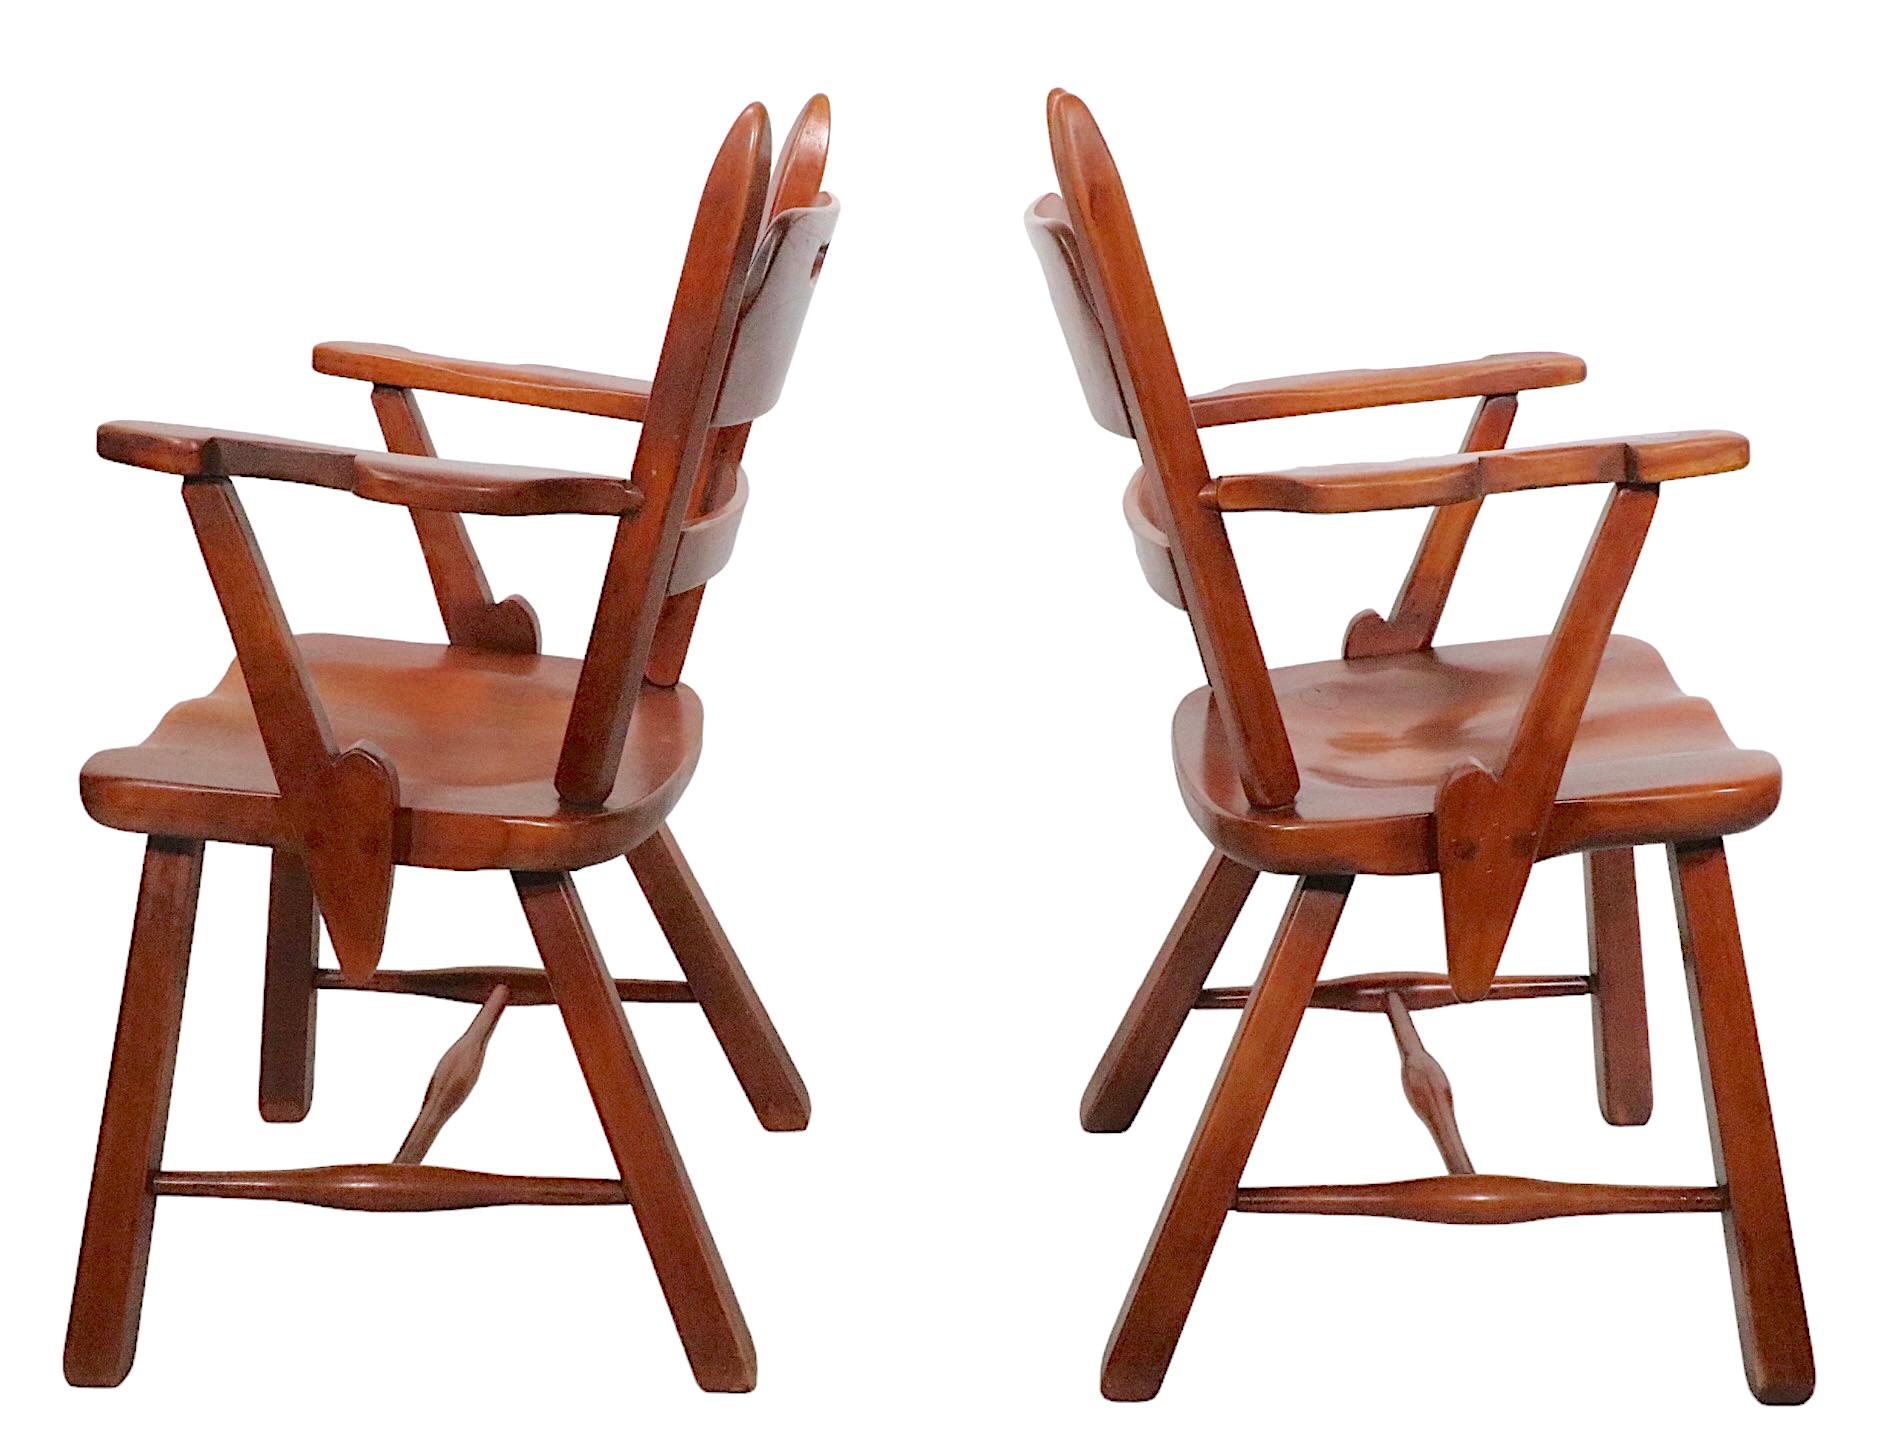 Exceptional pair of Herman de Vries Colonial Creation model 4125A maple arm chairs. This series illustrates early modern applied design produced by Cushman Manufacturing of Vt. circa 1930s, the arm chairs are particularly successful. These chairs